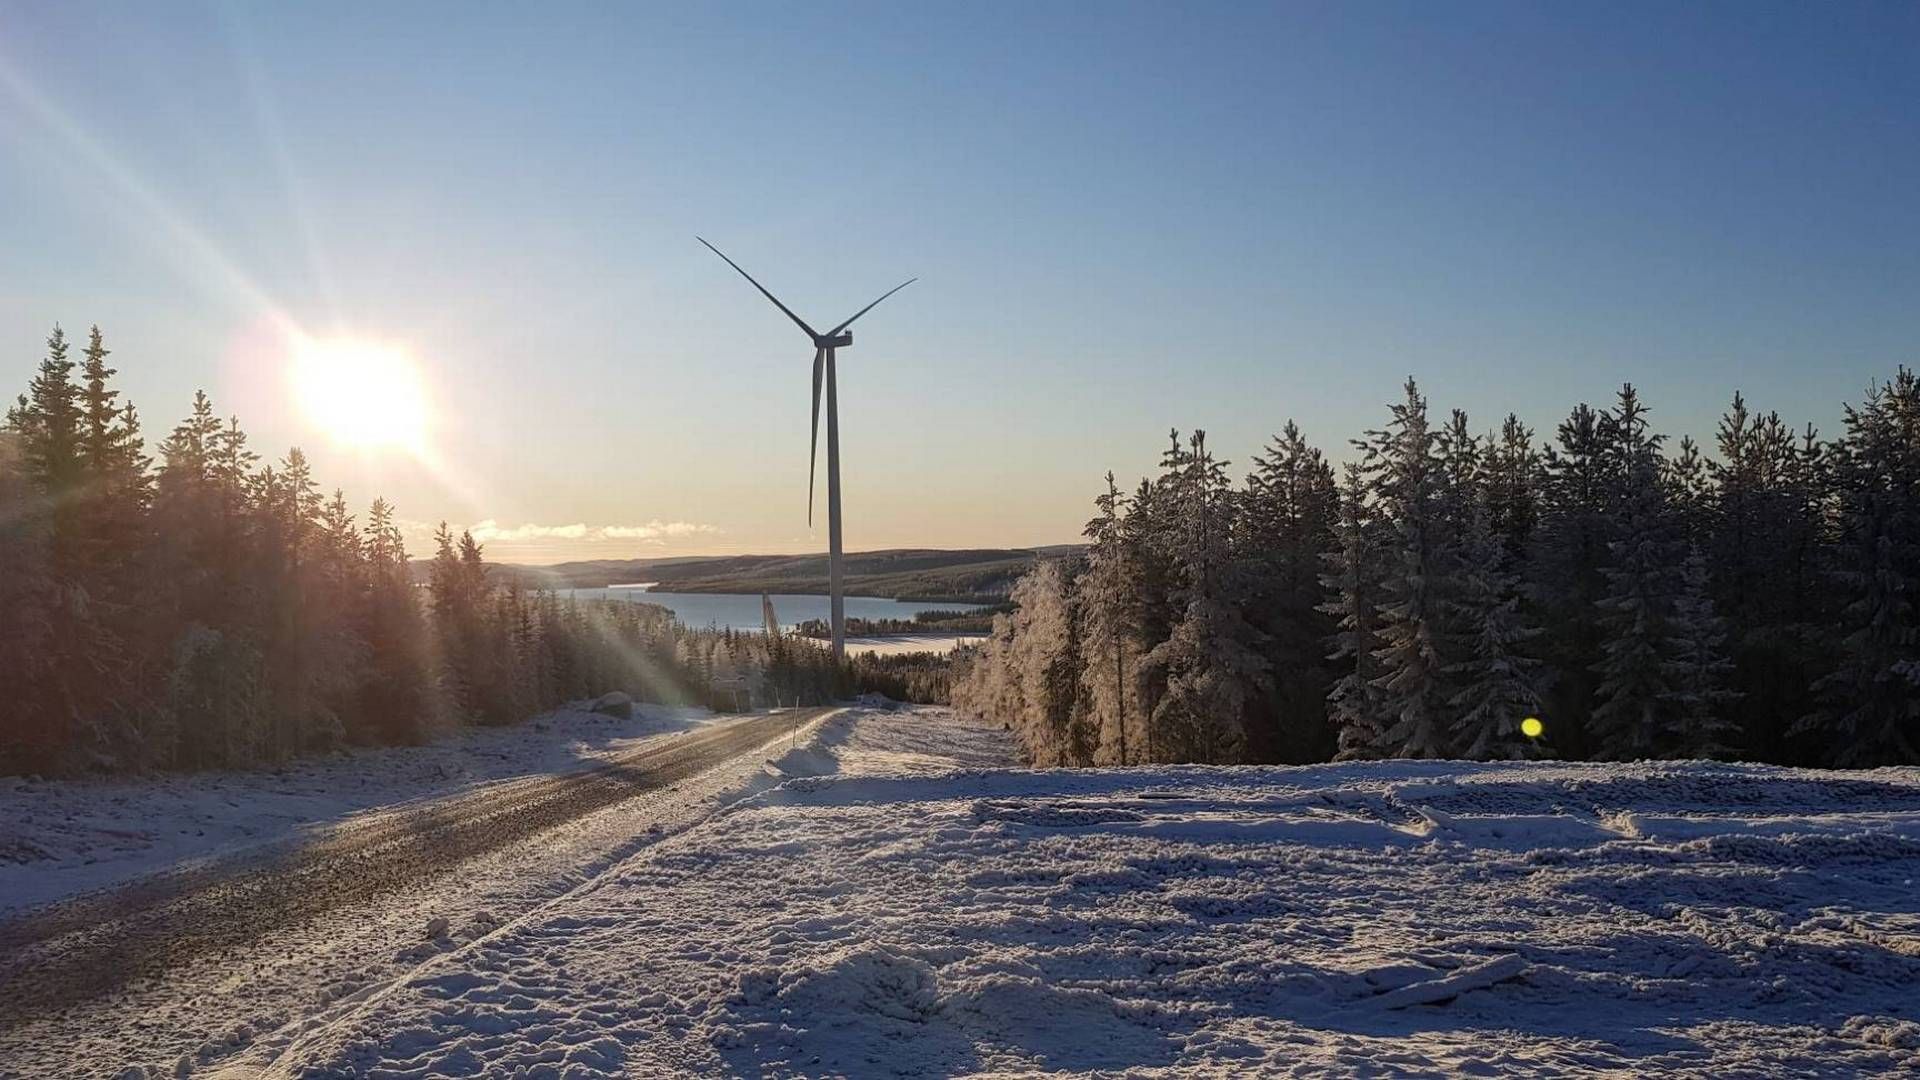 Once operational, the wind turbines will be able to produce enough green power to supply around 22,000 households in Hesse with green electricity every year. | Photo: Rwe